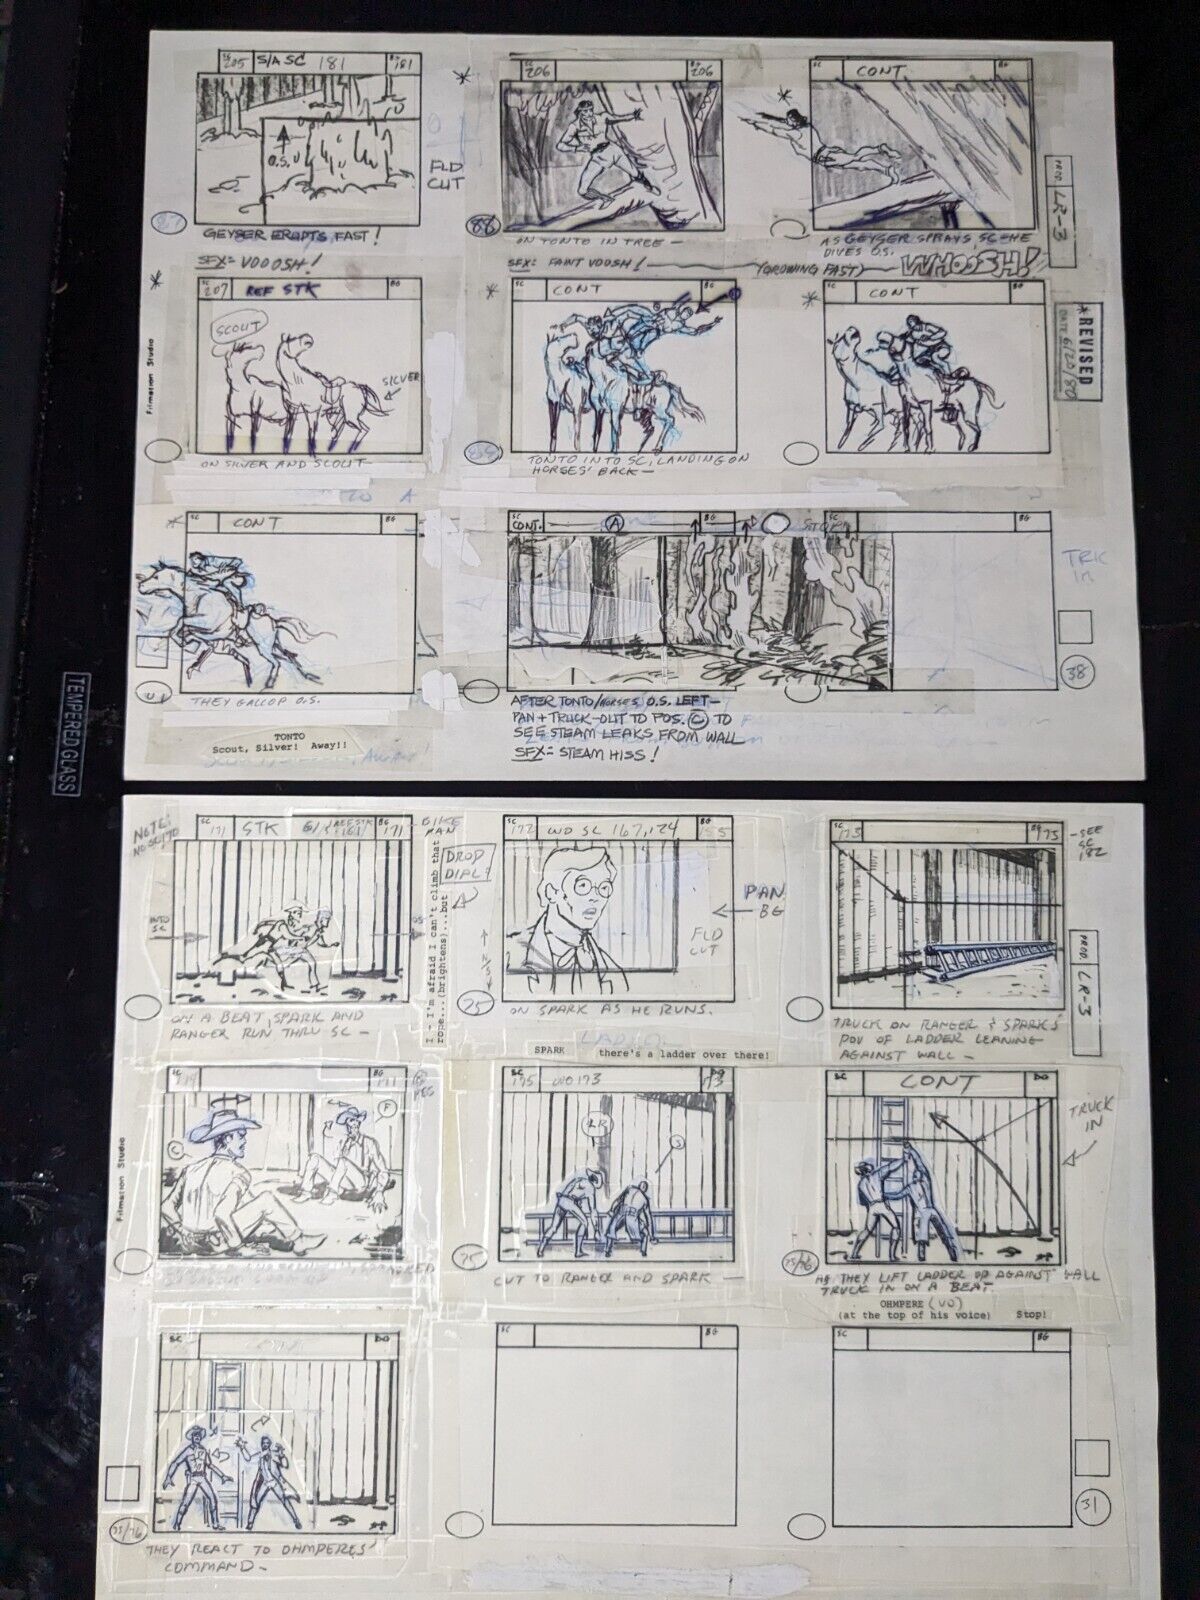 THE LONE RANGER ANIMATION CELS ART FILMATION  ART STORYBOARDS 80s Western TV II0